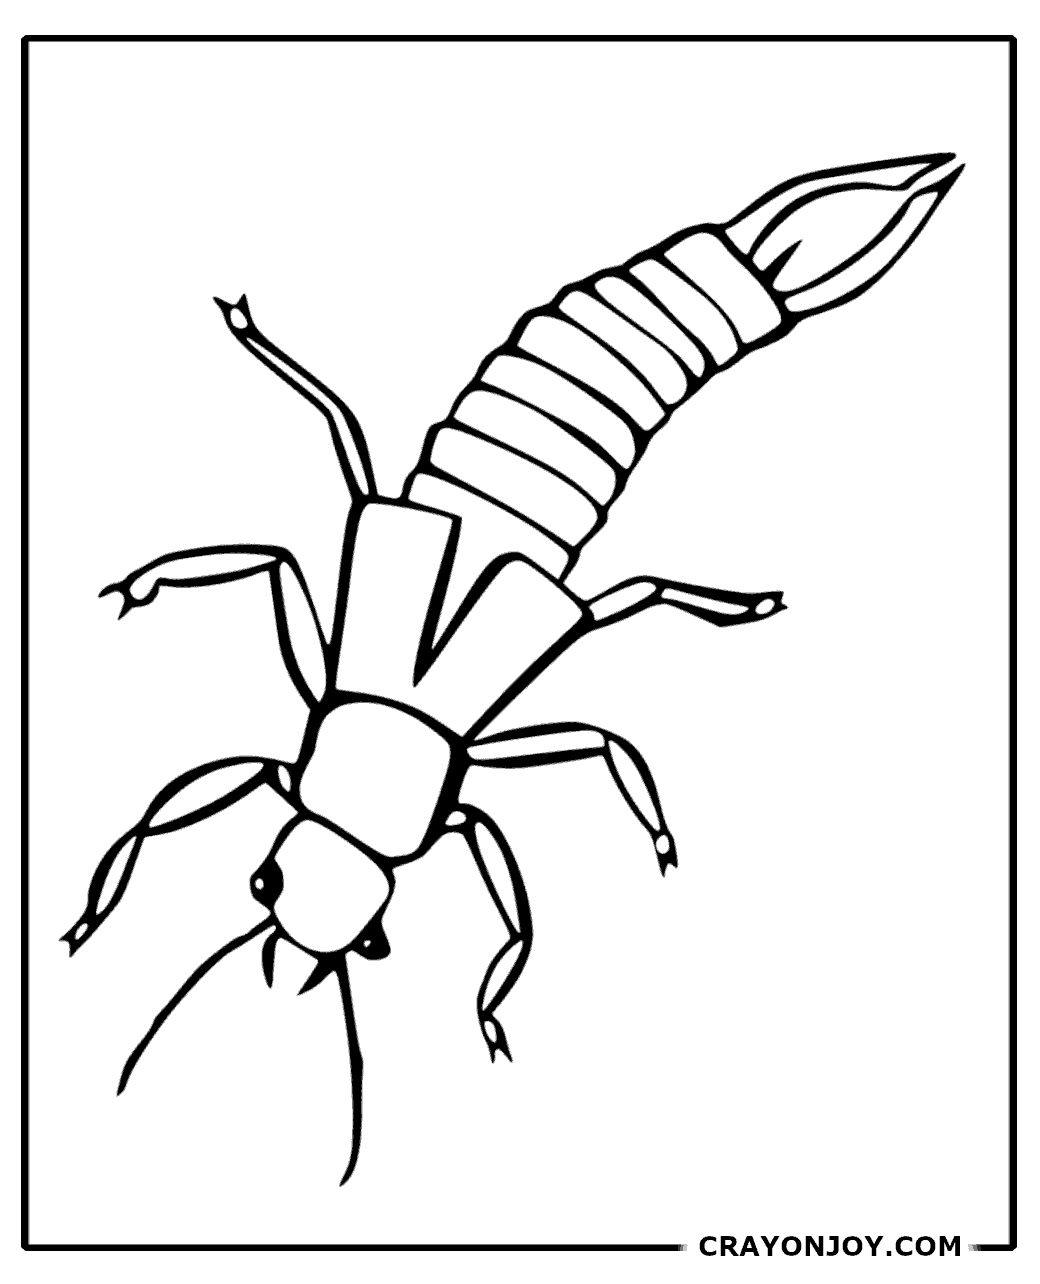 Free Printable Earwig Coloring Pages for Kids & Adults